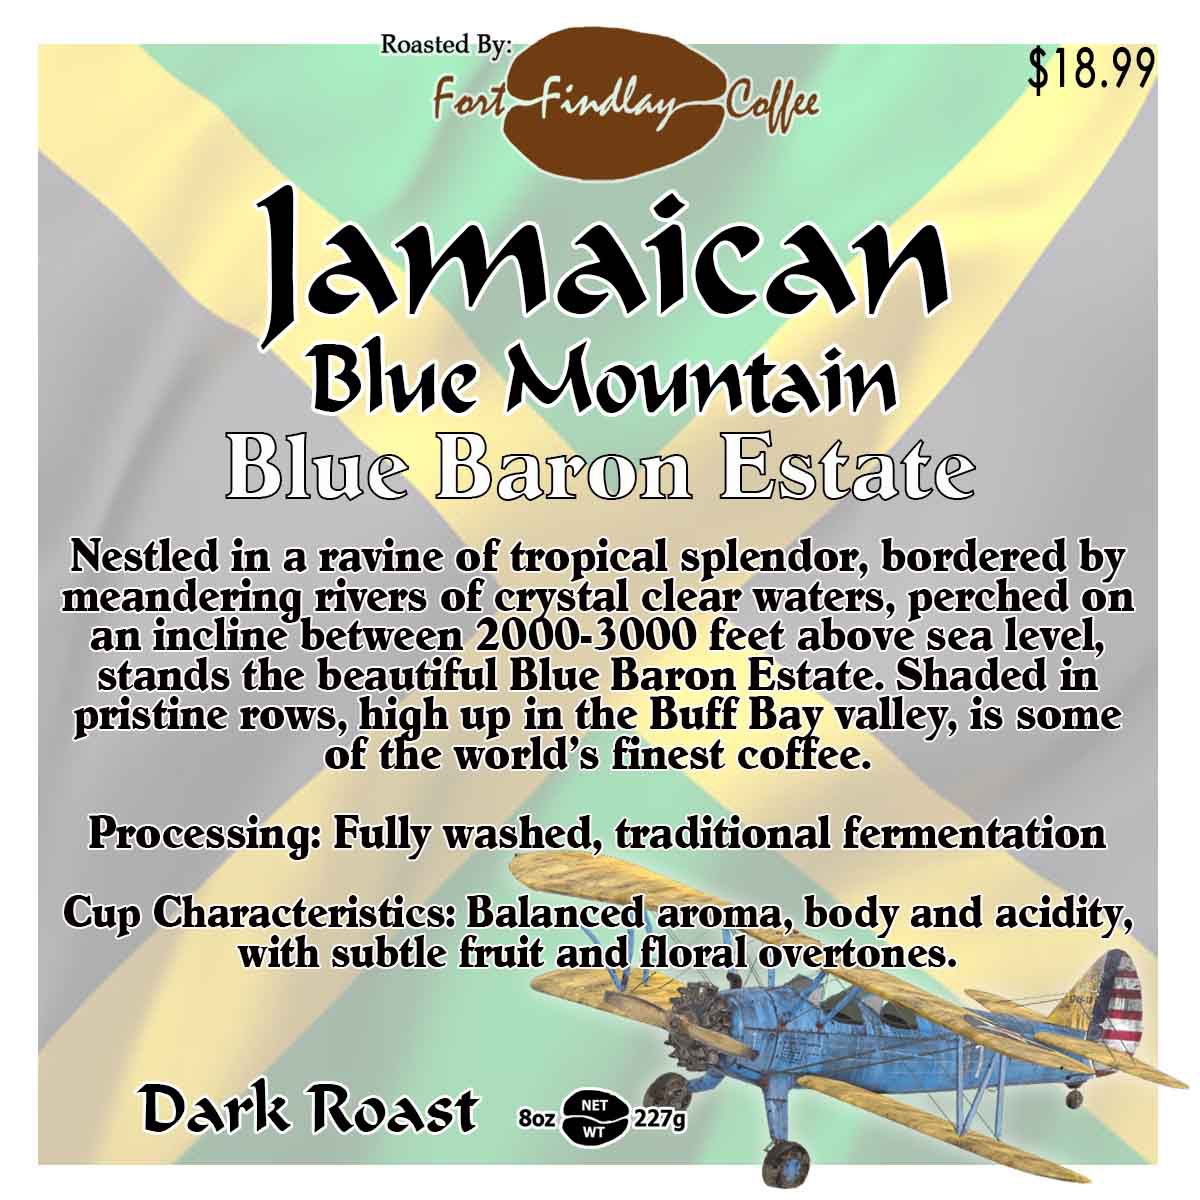 Get ready, we’re flying with the Blue Baron! Jamaican Blue Mountain Dark Roast and Irish Whiskey will be on tap for Friday!

#fortfindlay #fortfindlaycoffee #fortfindlaydoughnuts #findlayohio #shoplocal #supportsmallbusiness